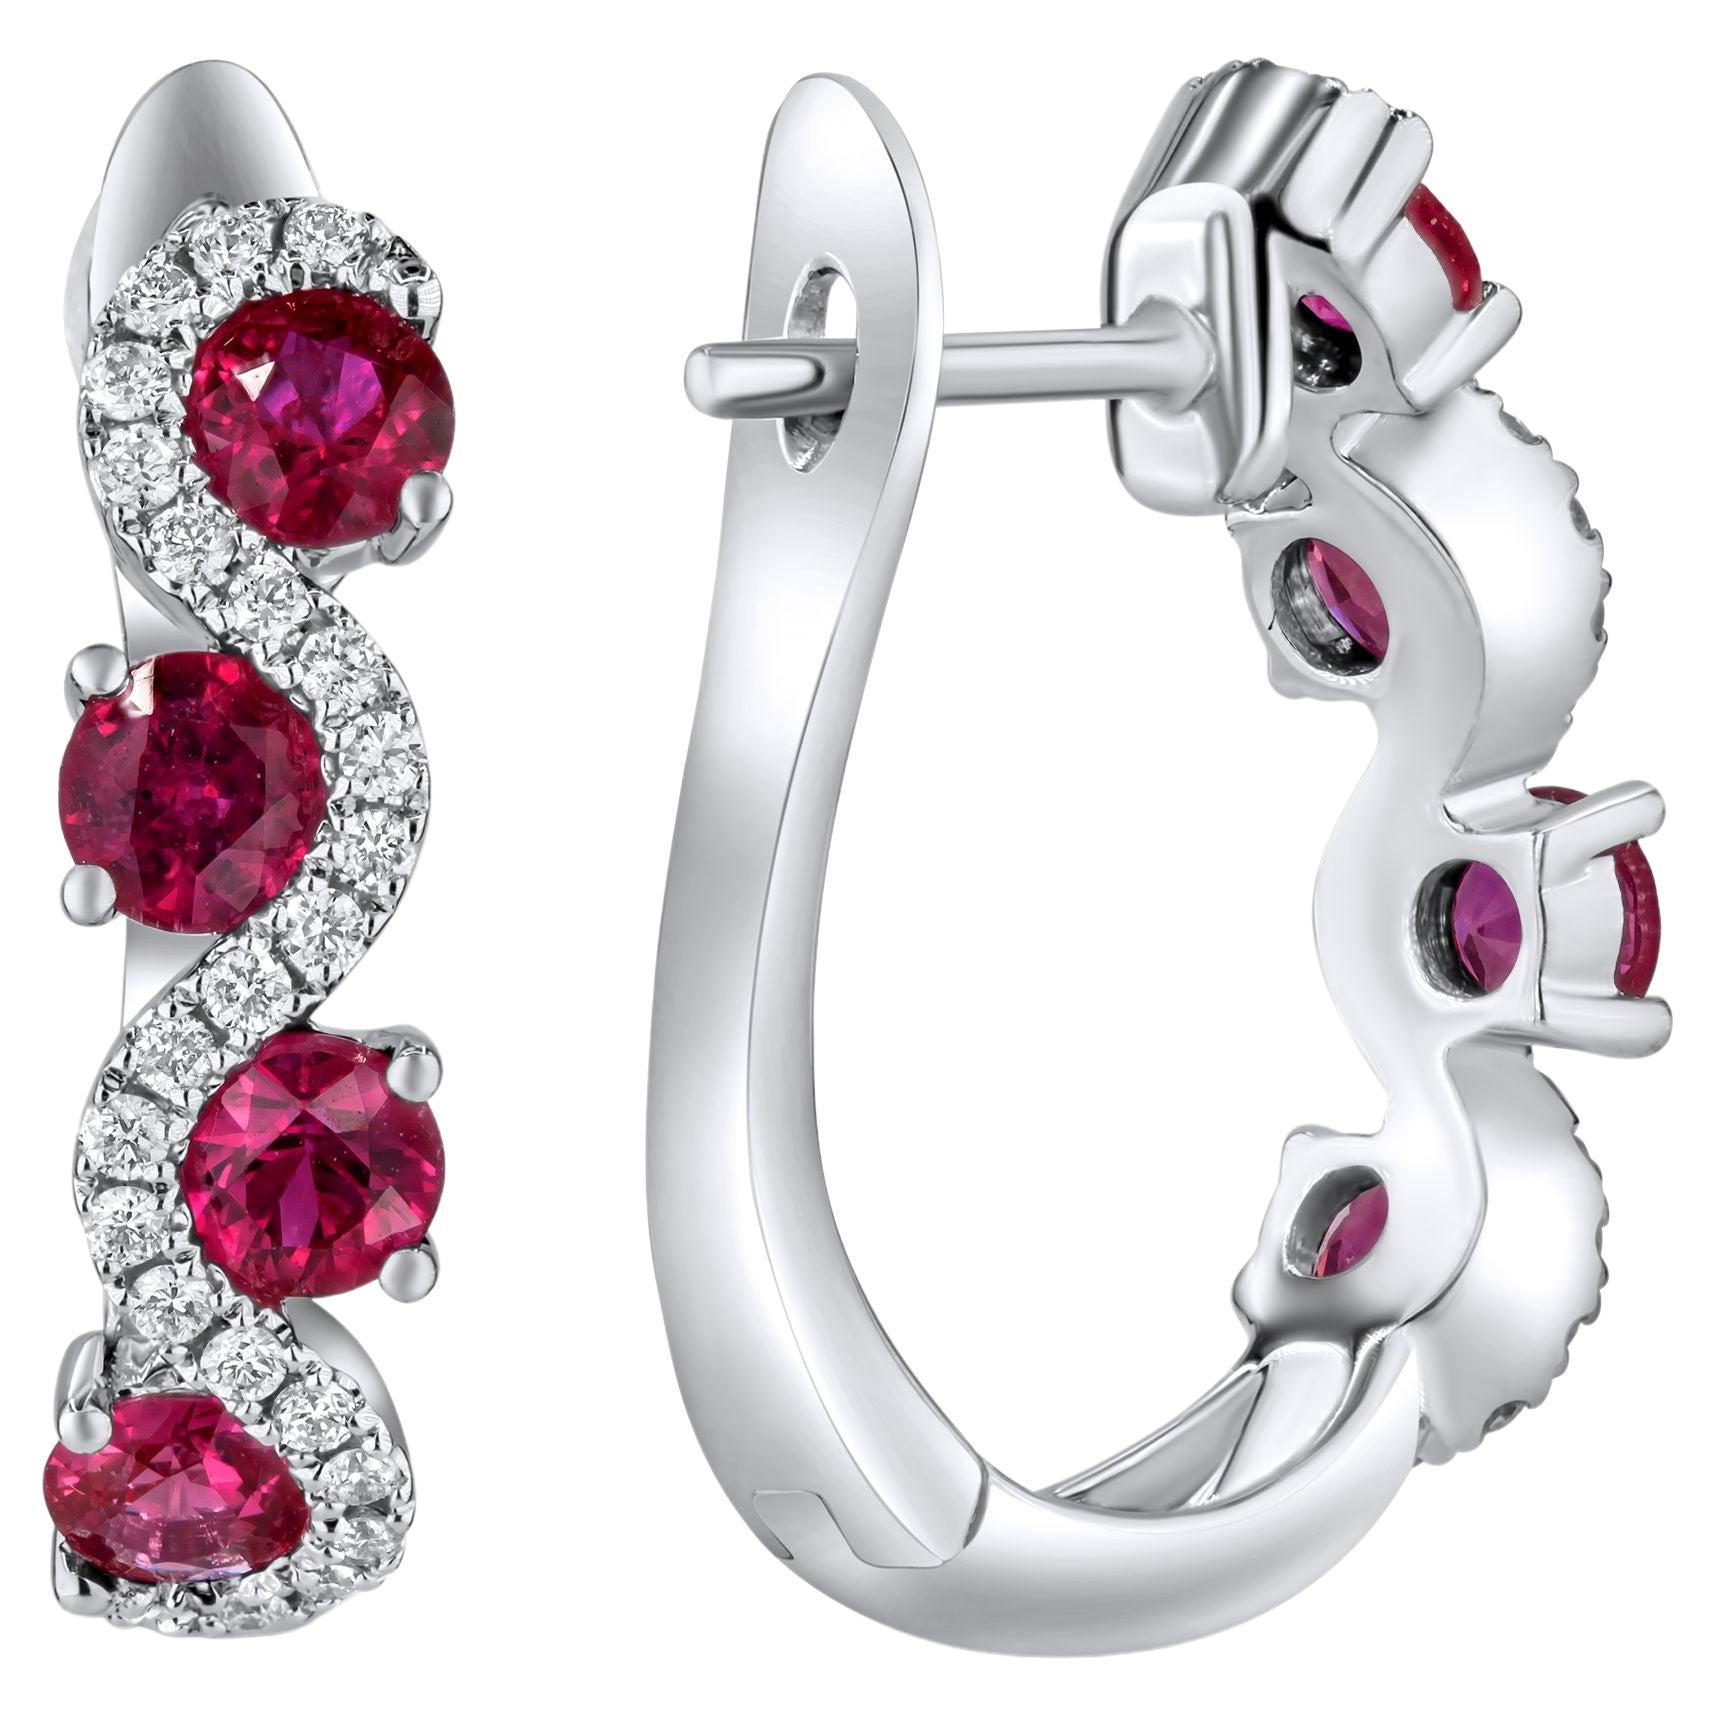 1.45 Carat Ruby and Diamond Hoop Earrings in 14k White Gold ref1922 For Sale